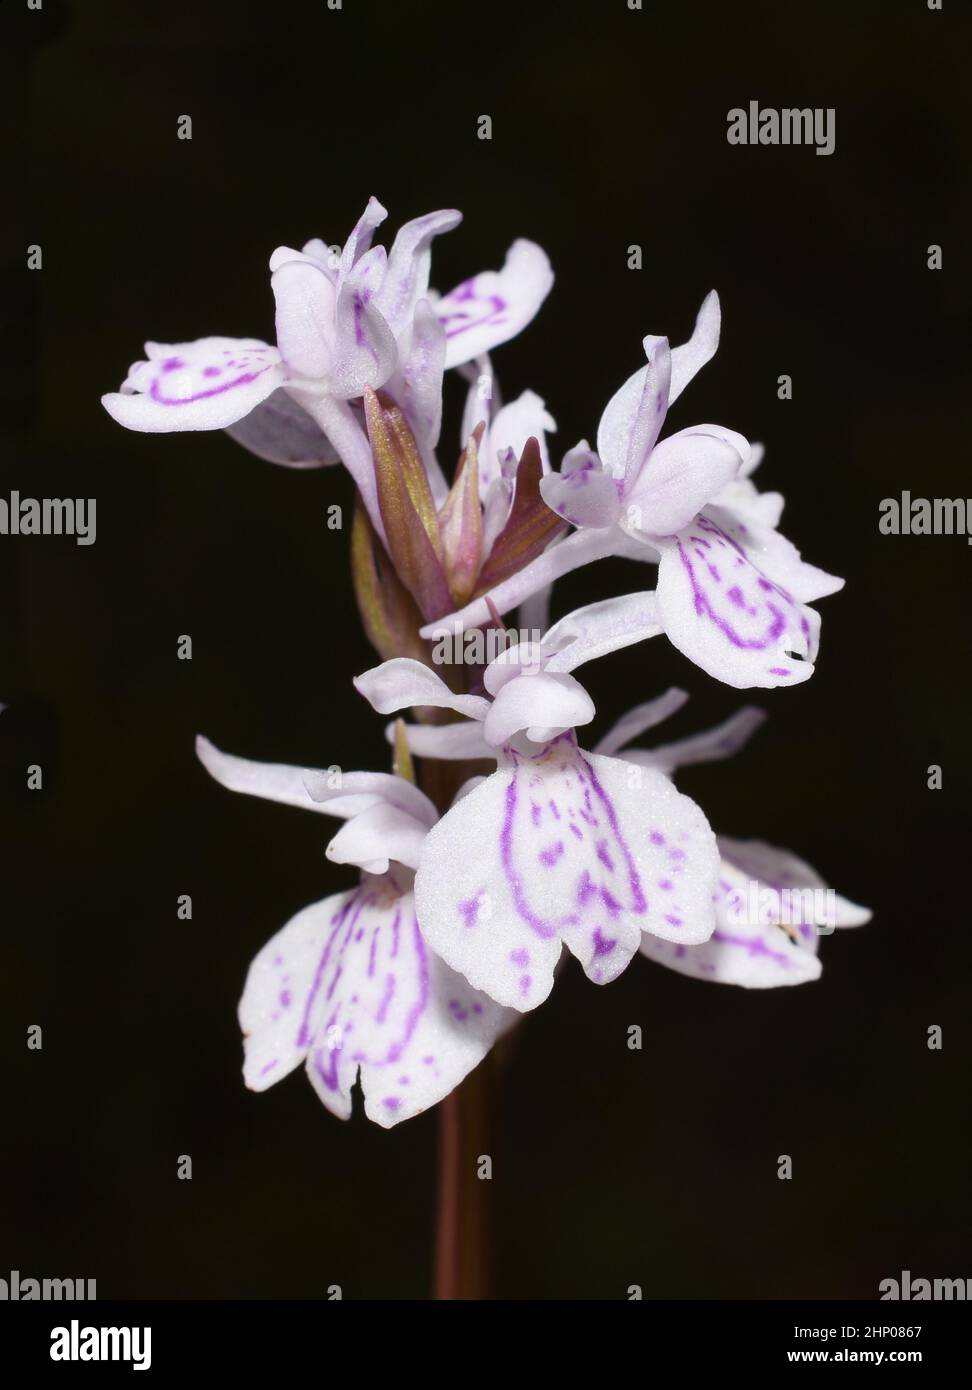 Close-up on flowers of heath spotted orchid Dactylorhiza maculata on black background Stock Photo